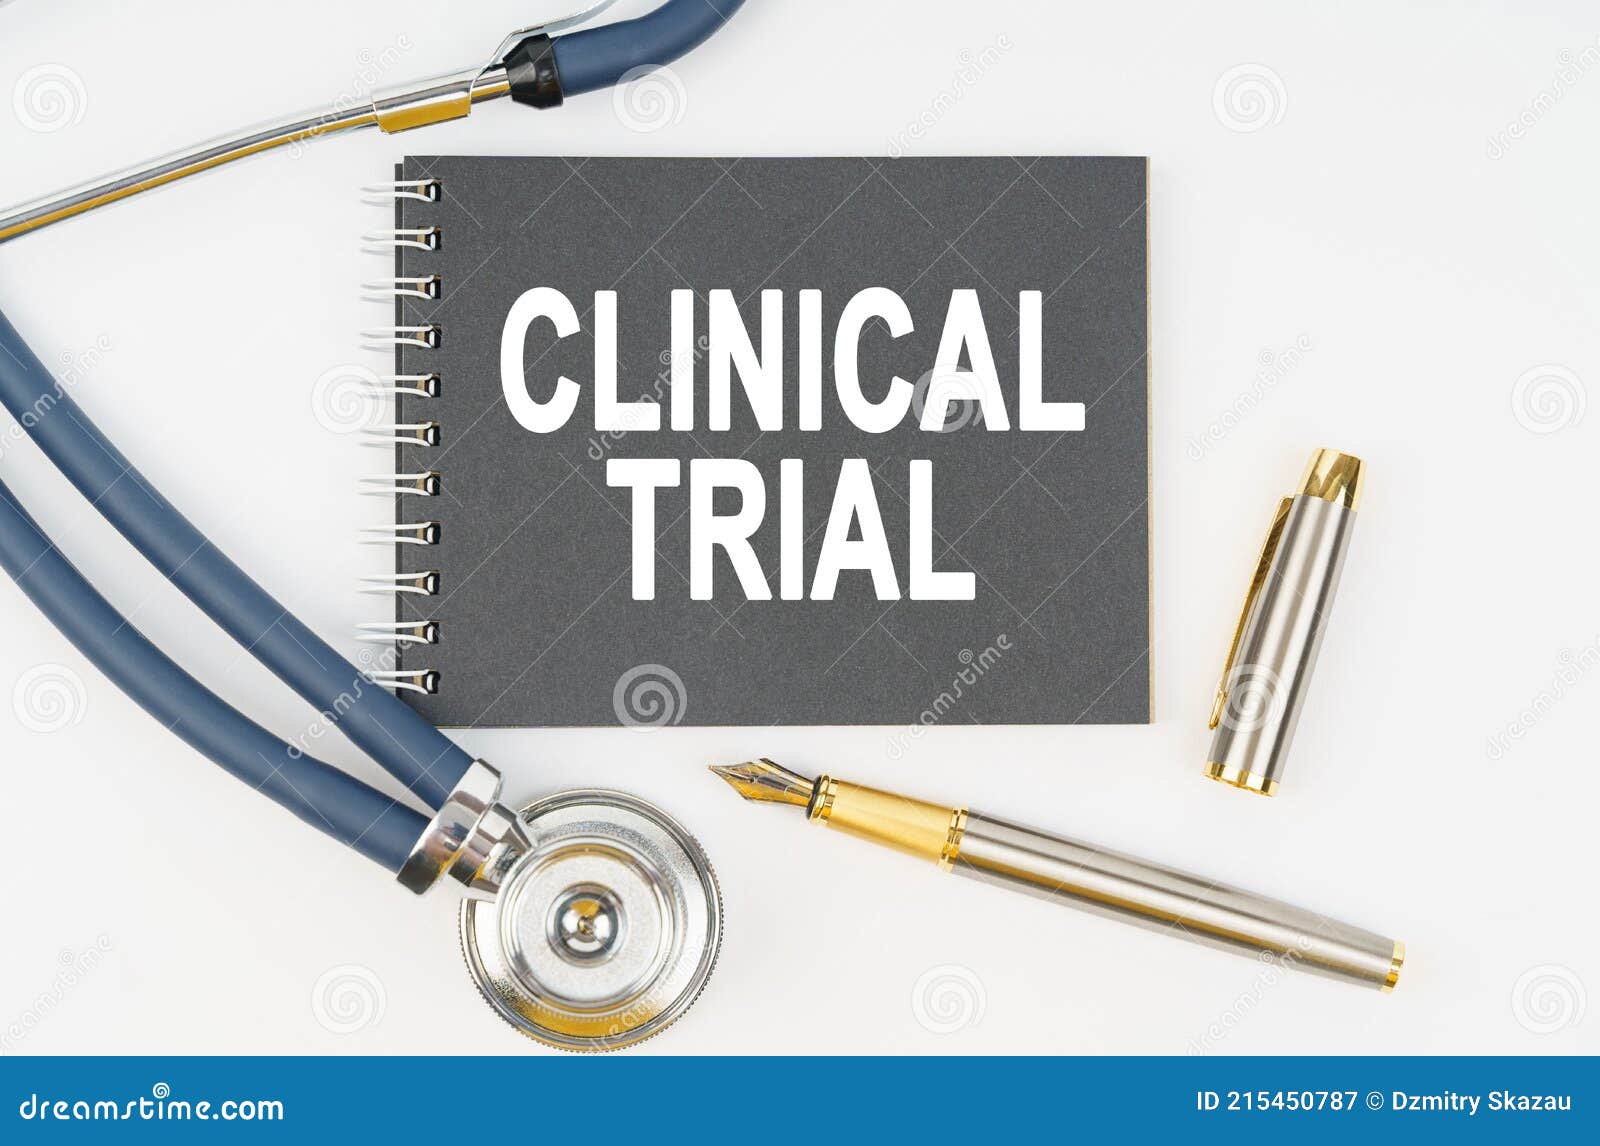 on a white background lie a stethoscope, a pen and a notebook with the inscription - clinical trial